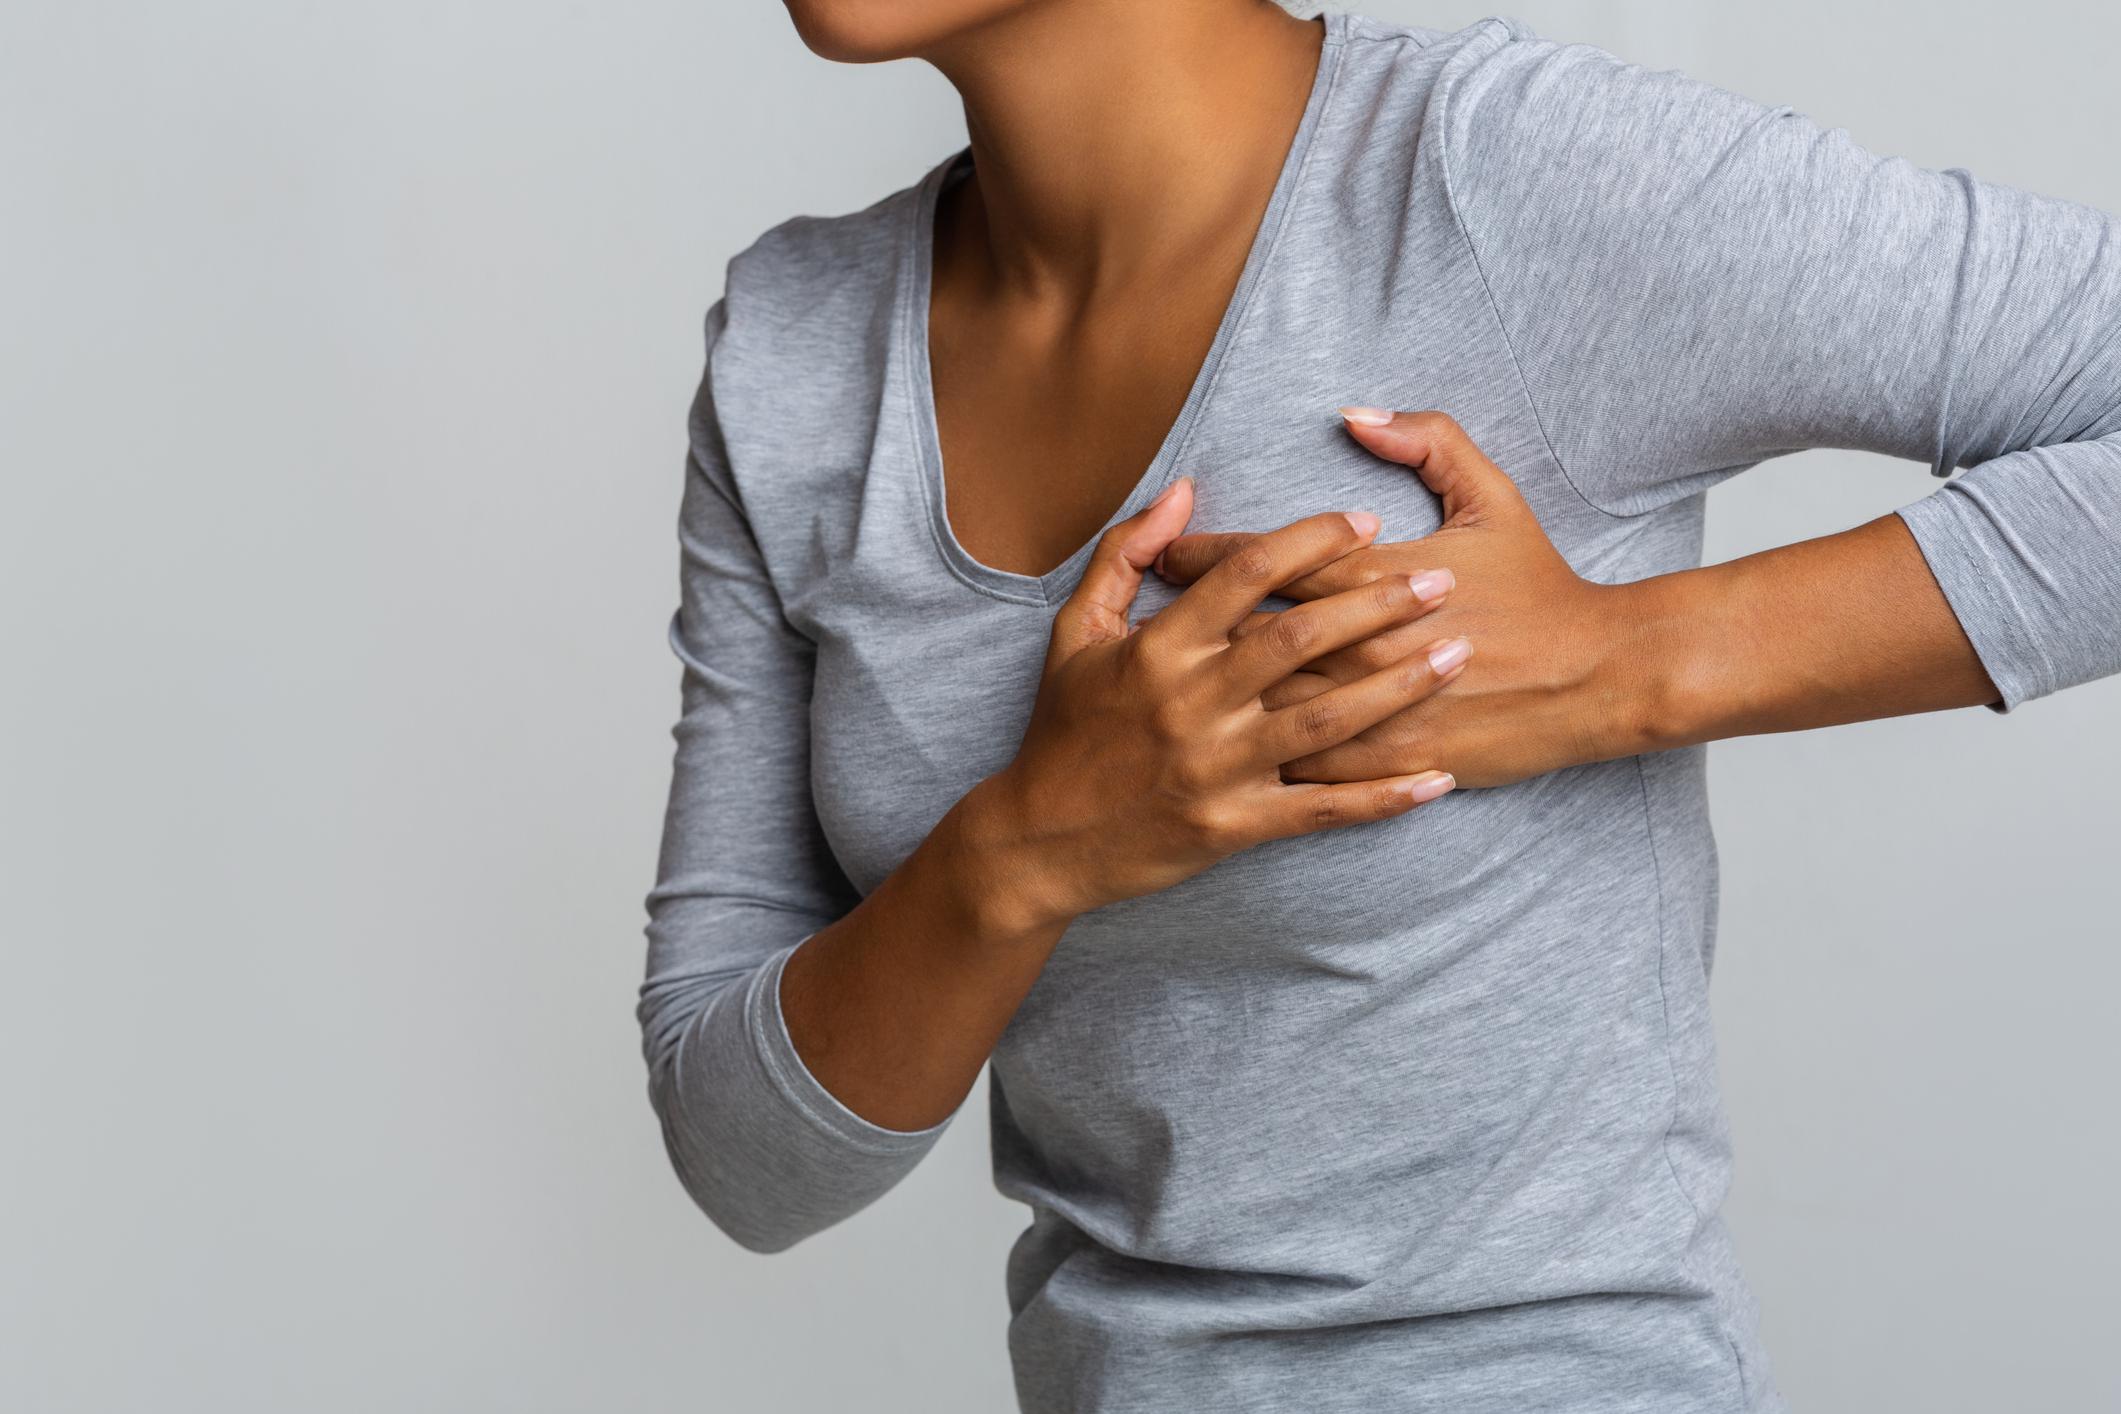 Pain Under Left Breast: Causes, Treatment, and More